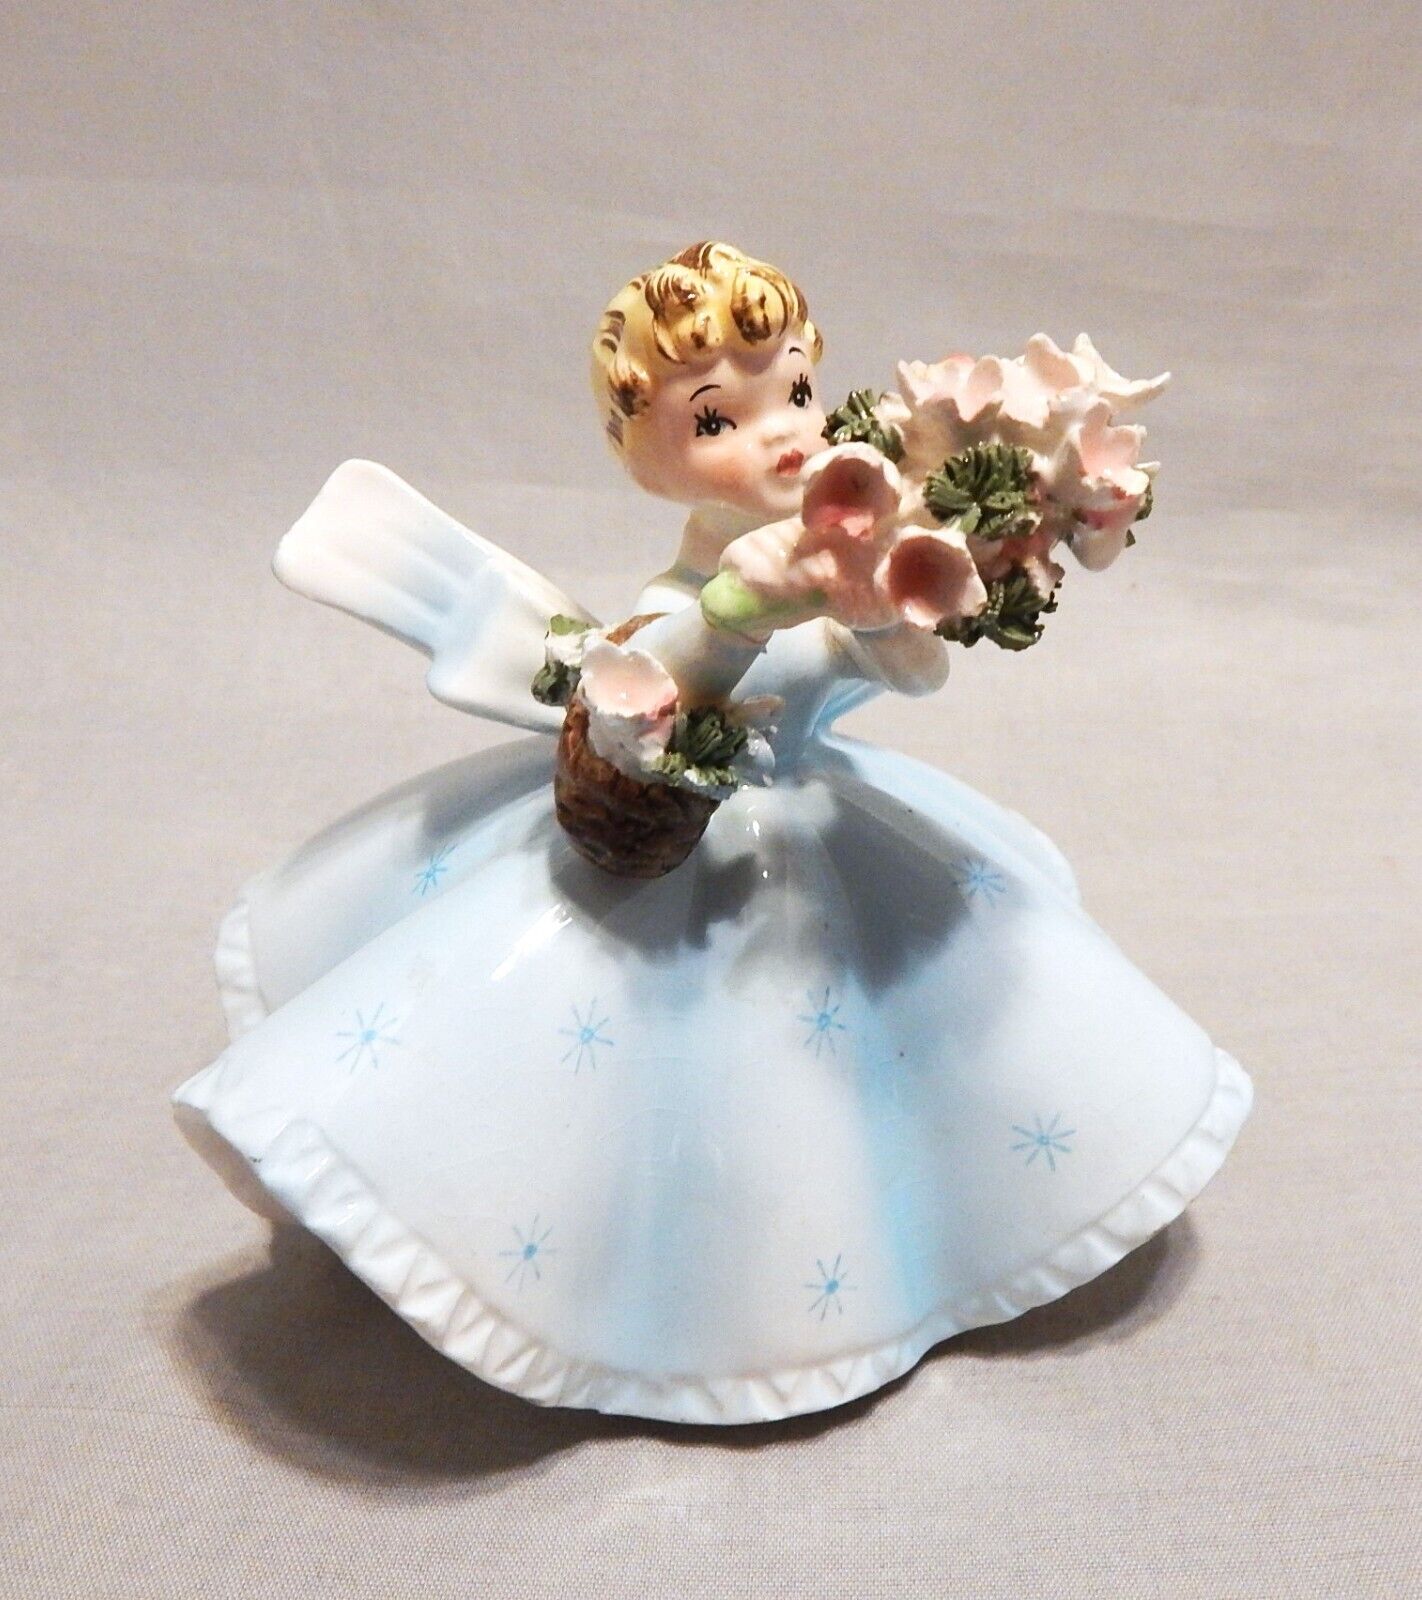 Vintage Lefton Girl of the Month Series Figurine Holding Bouquet